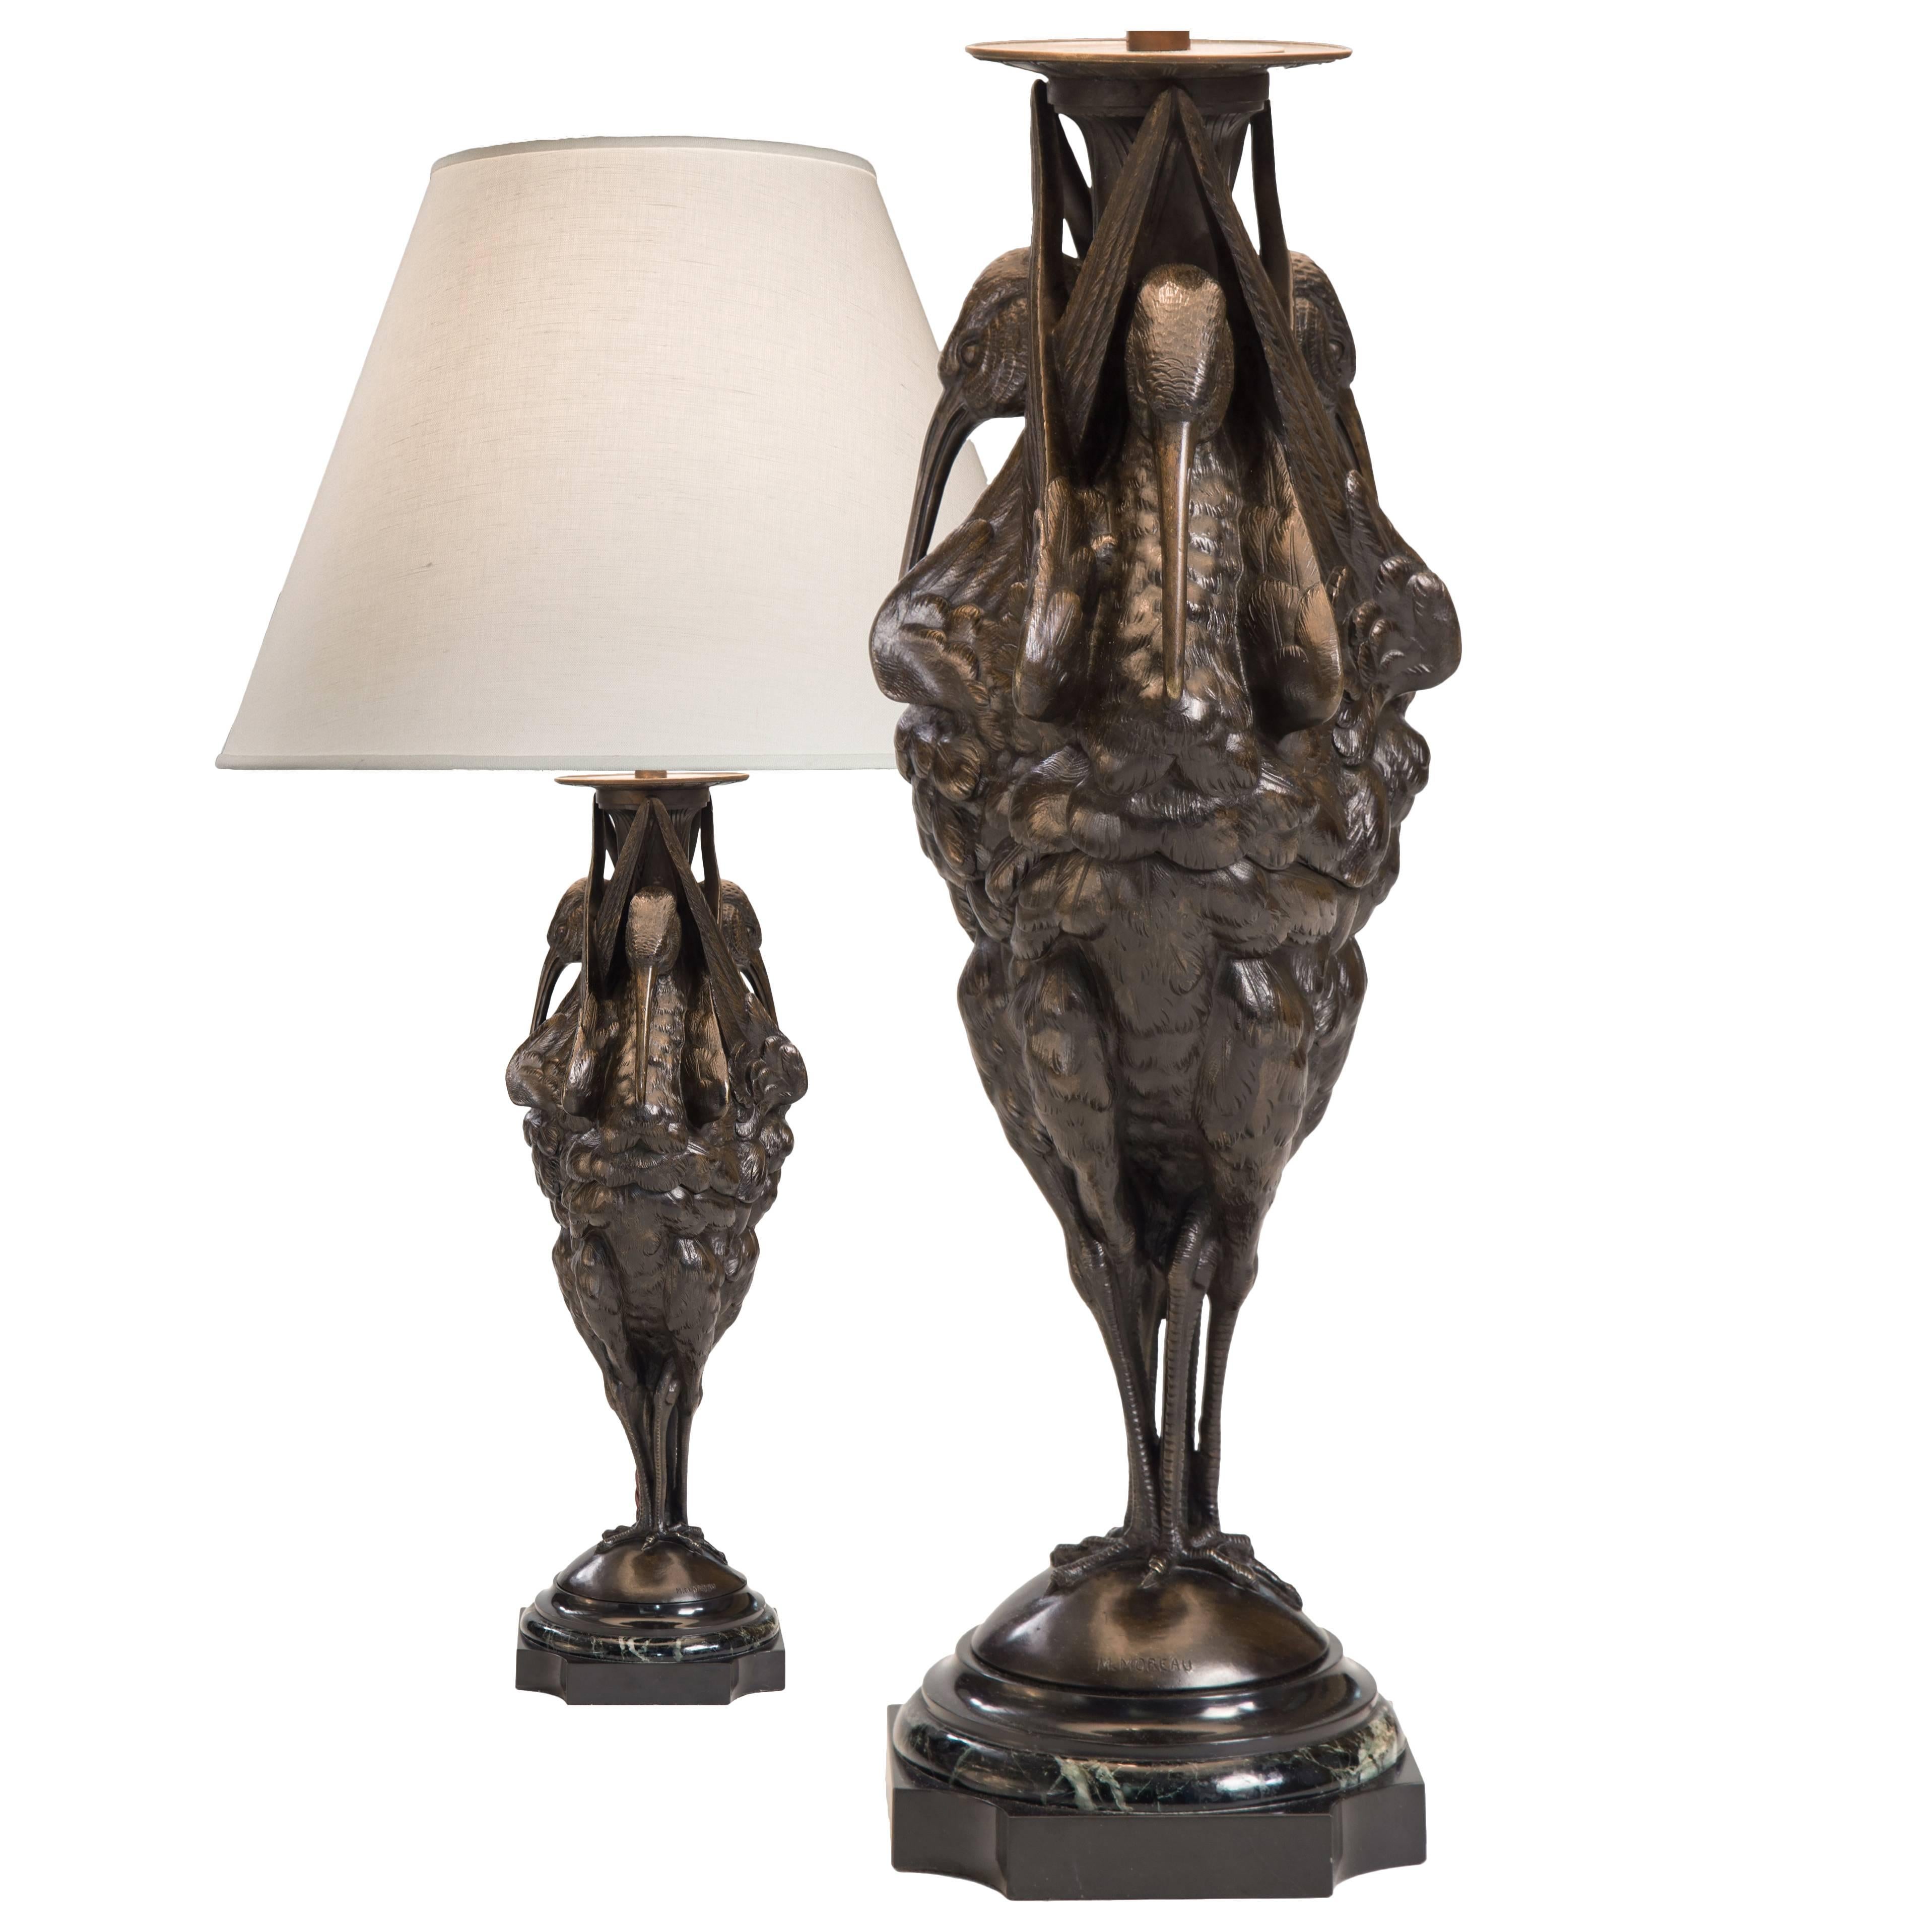 Unusual Pair of Patinated Bronze and Marble Sculptures, Now Table Lamps